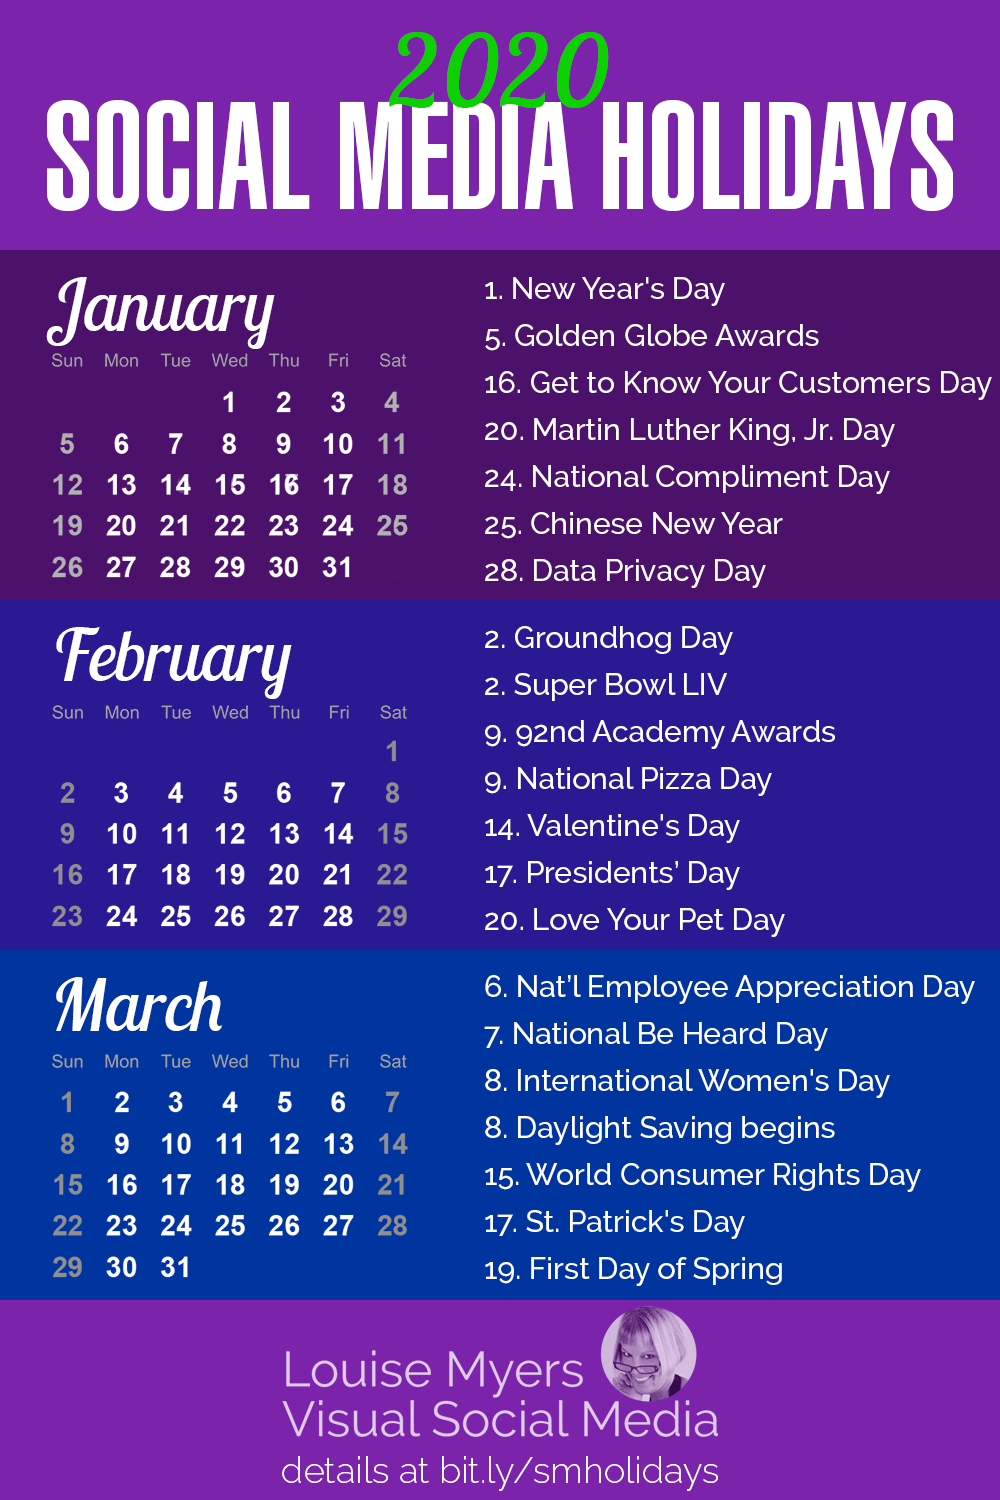 84 Social Media Holidays You Need In 2020: Indispensable! intended for International Days In January